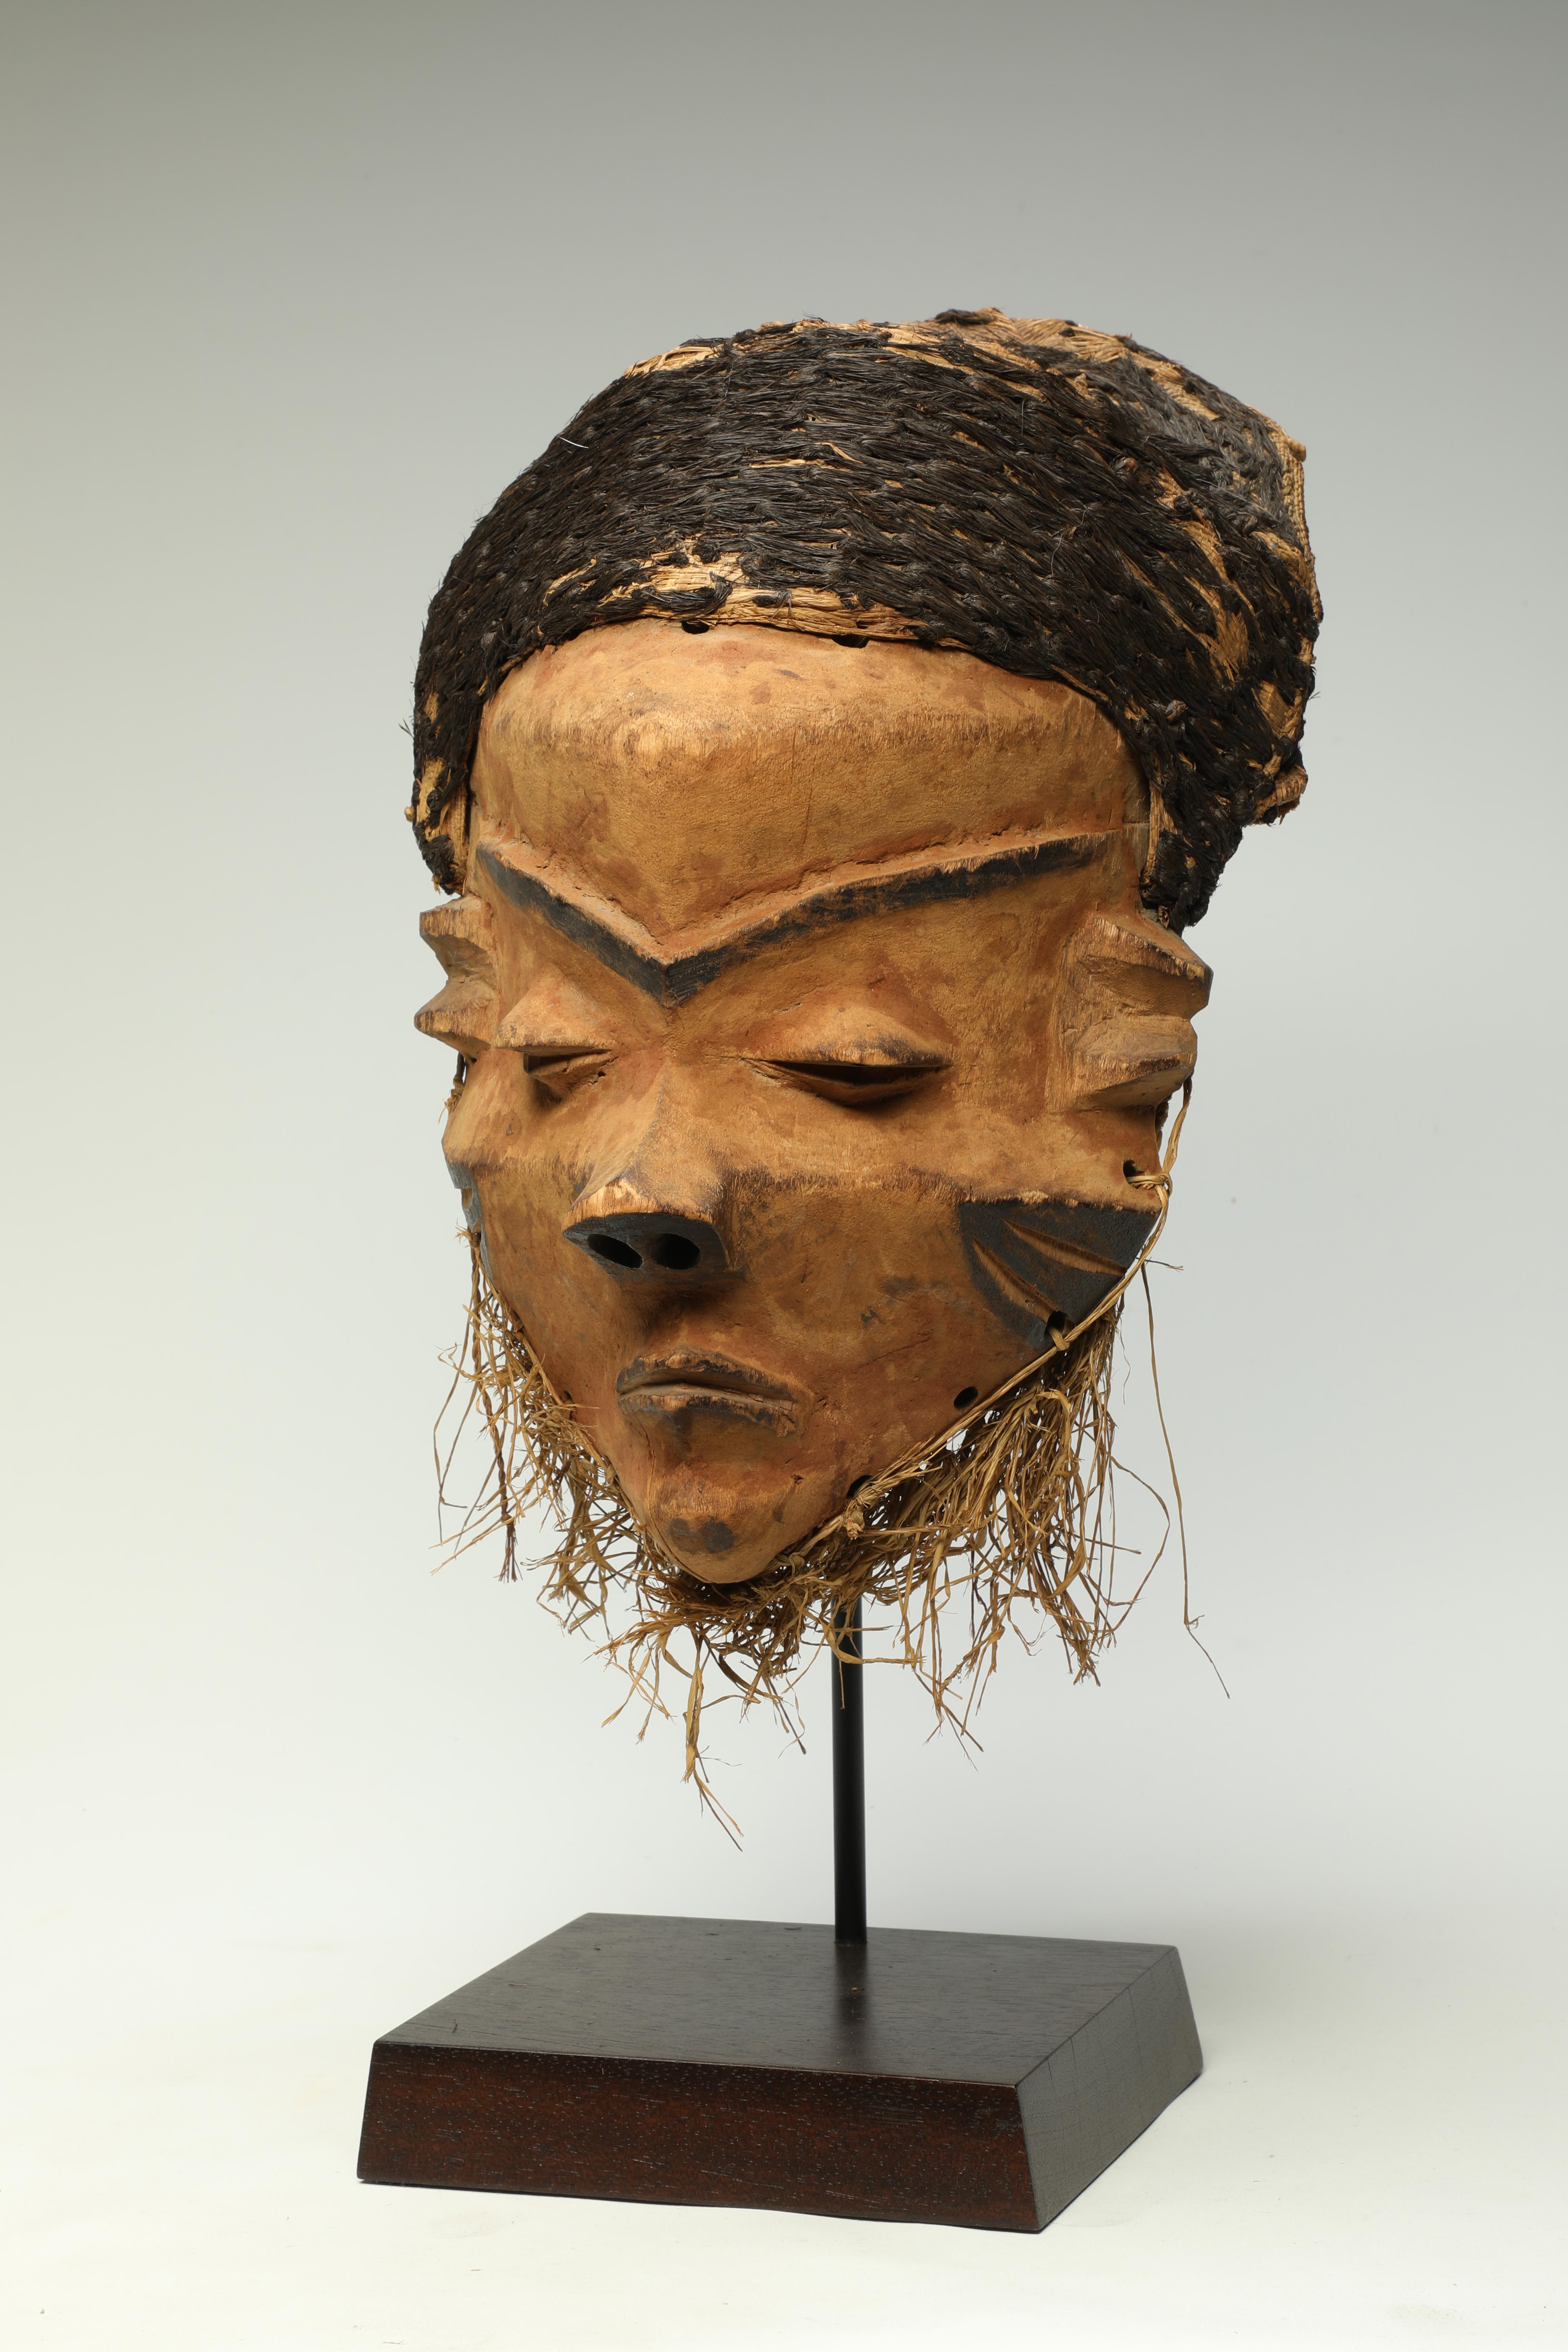 Old Pende giwoyo mask with traces of pigments, black and red and woven black raffia hair cap. Strong face with tight expression, weathered surface, good age. From private collection, Germany.
The mask is 12 inches high, on custom wood base total